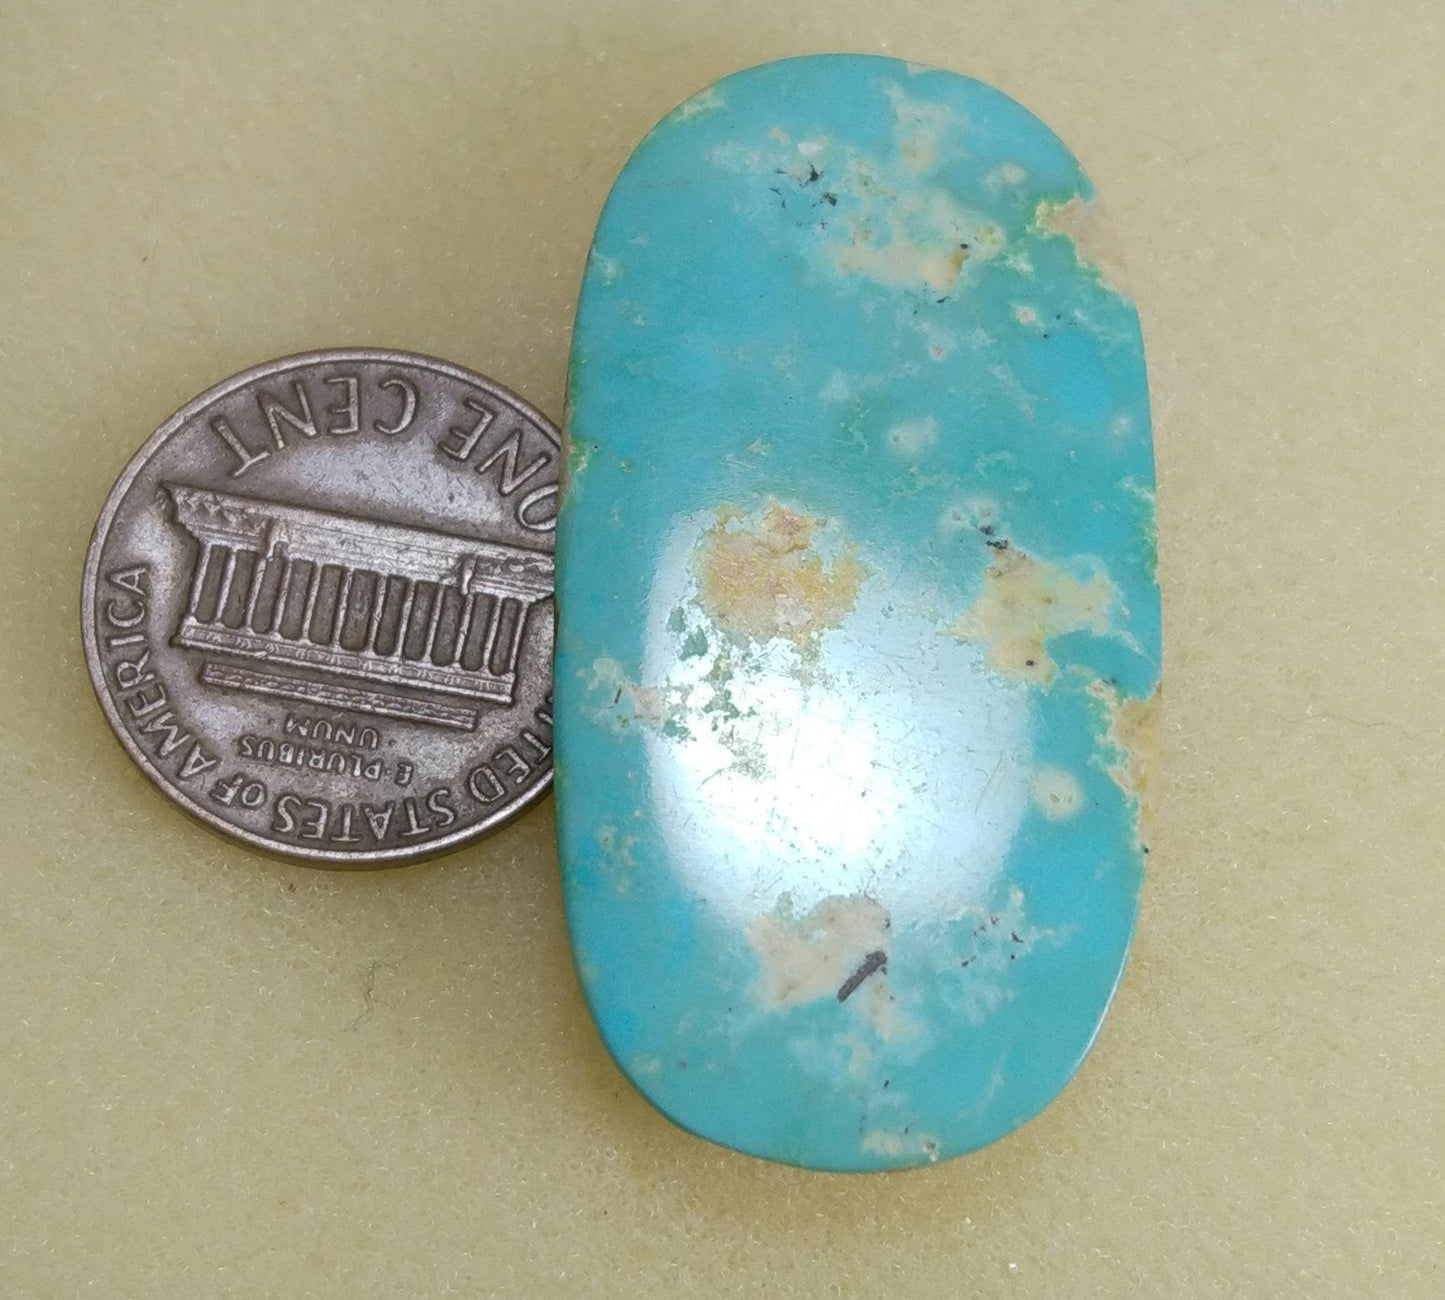 ARSAA GEMS AND MINERALSNatural top quality beautiful 52 carats untreated unheated oval shape turquoise cabochon - Premium  from ARSAA GEMS AND MINERALS - Just $50.00! Shop now at ARSAA GEMS AND MINERALS